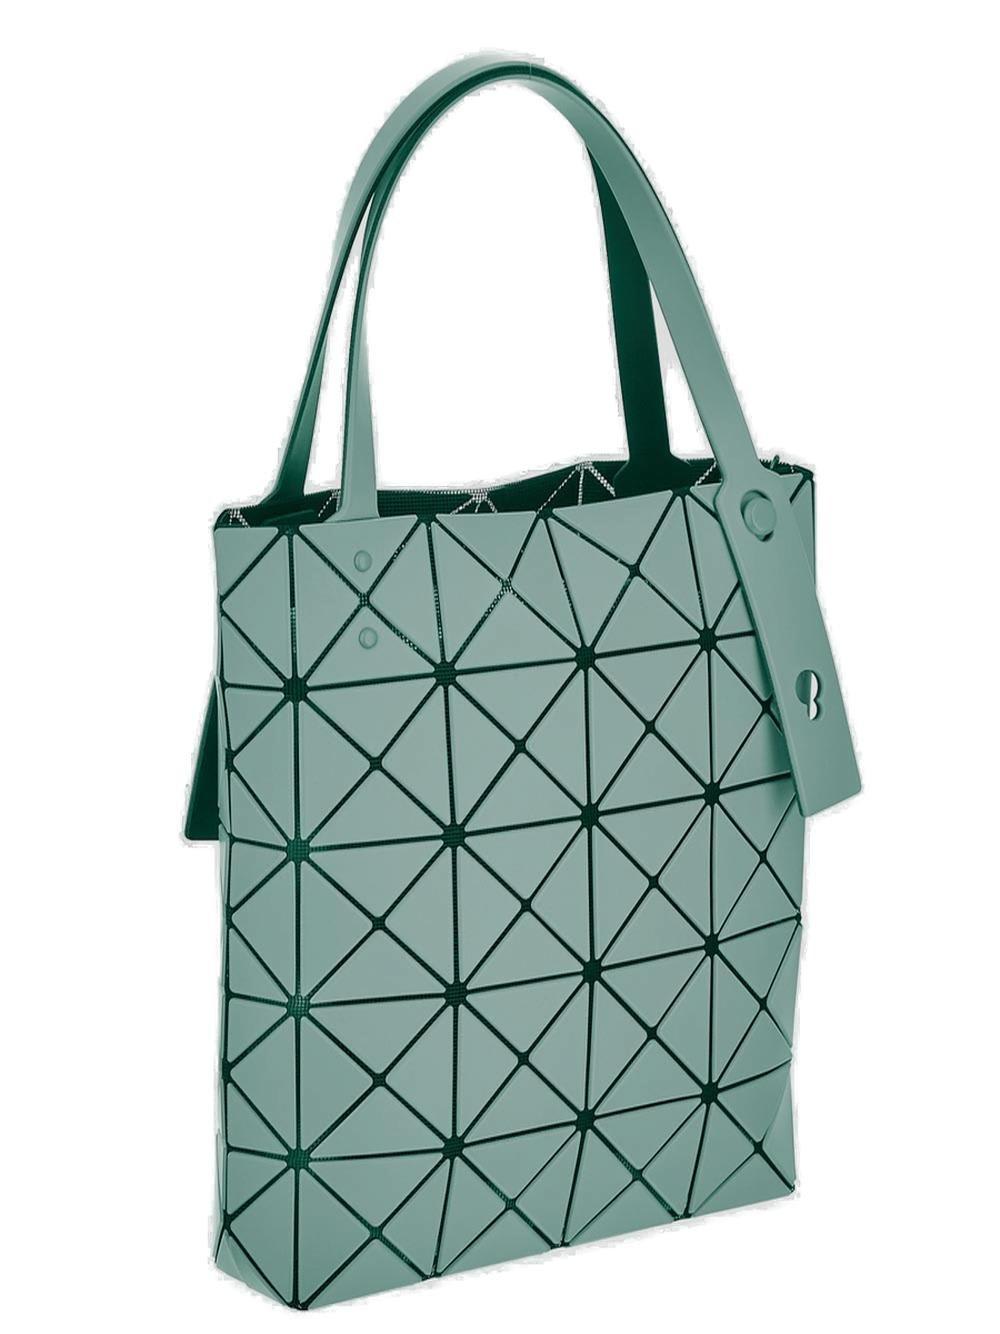 Bao Bao Issey Miyake Lucent Boxy Tote Bag In Mint | ModeSens